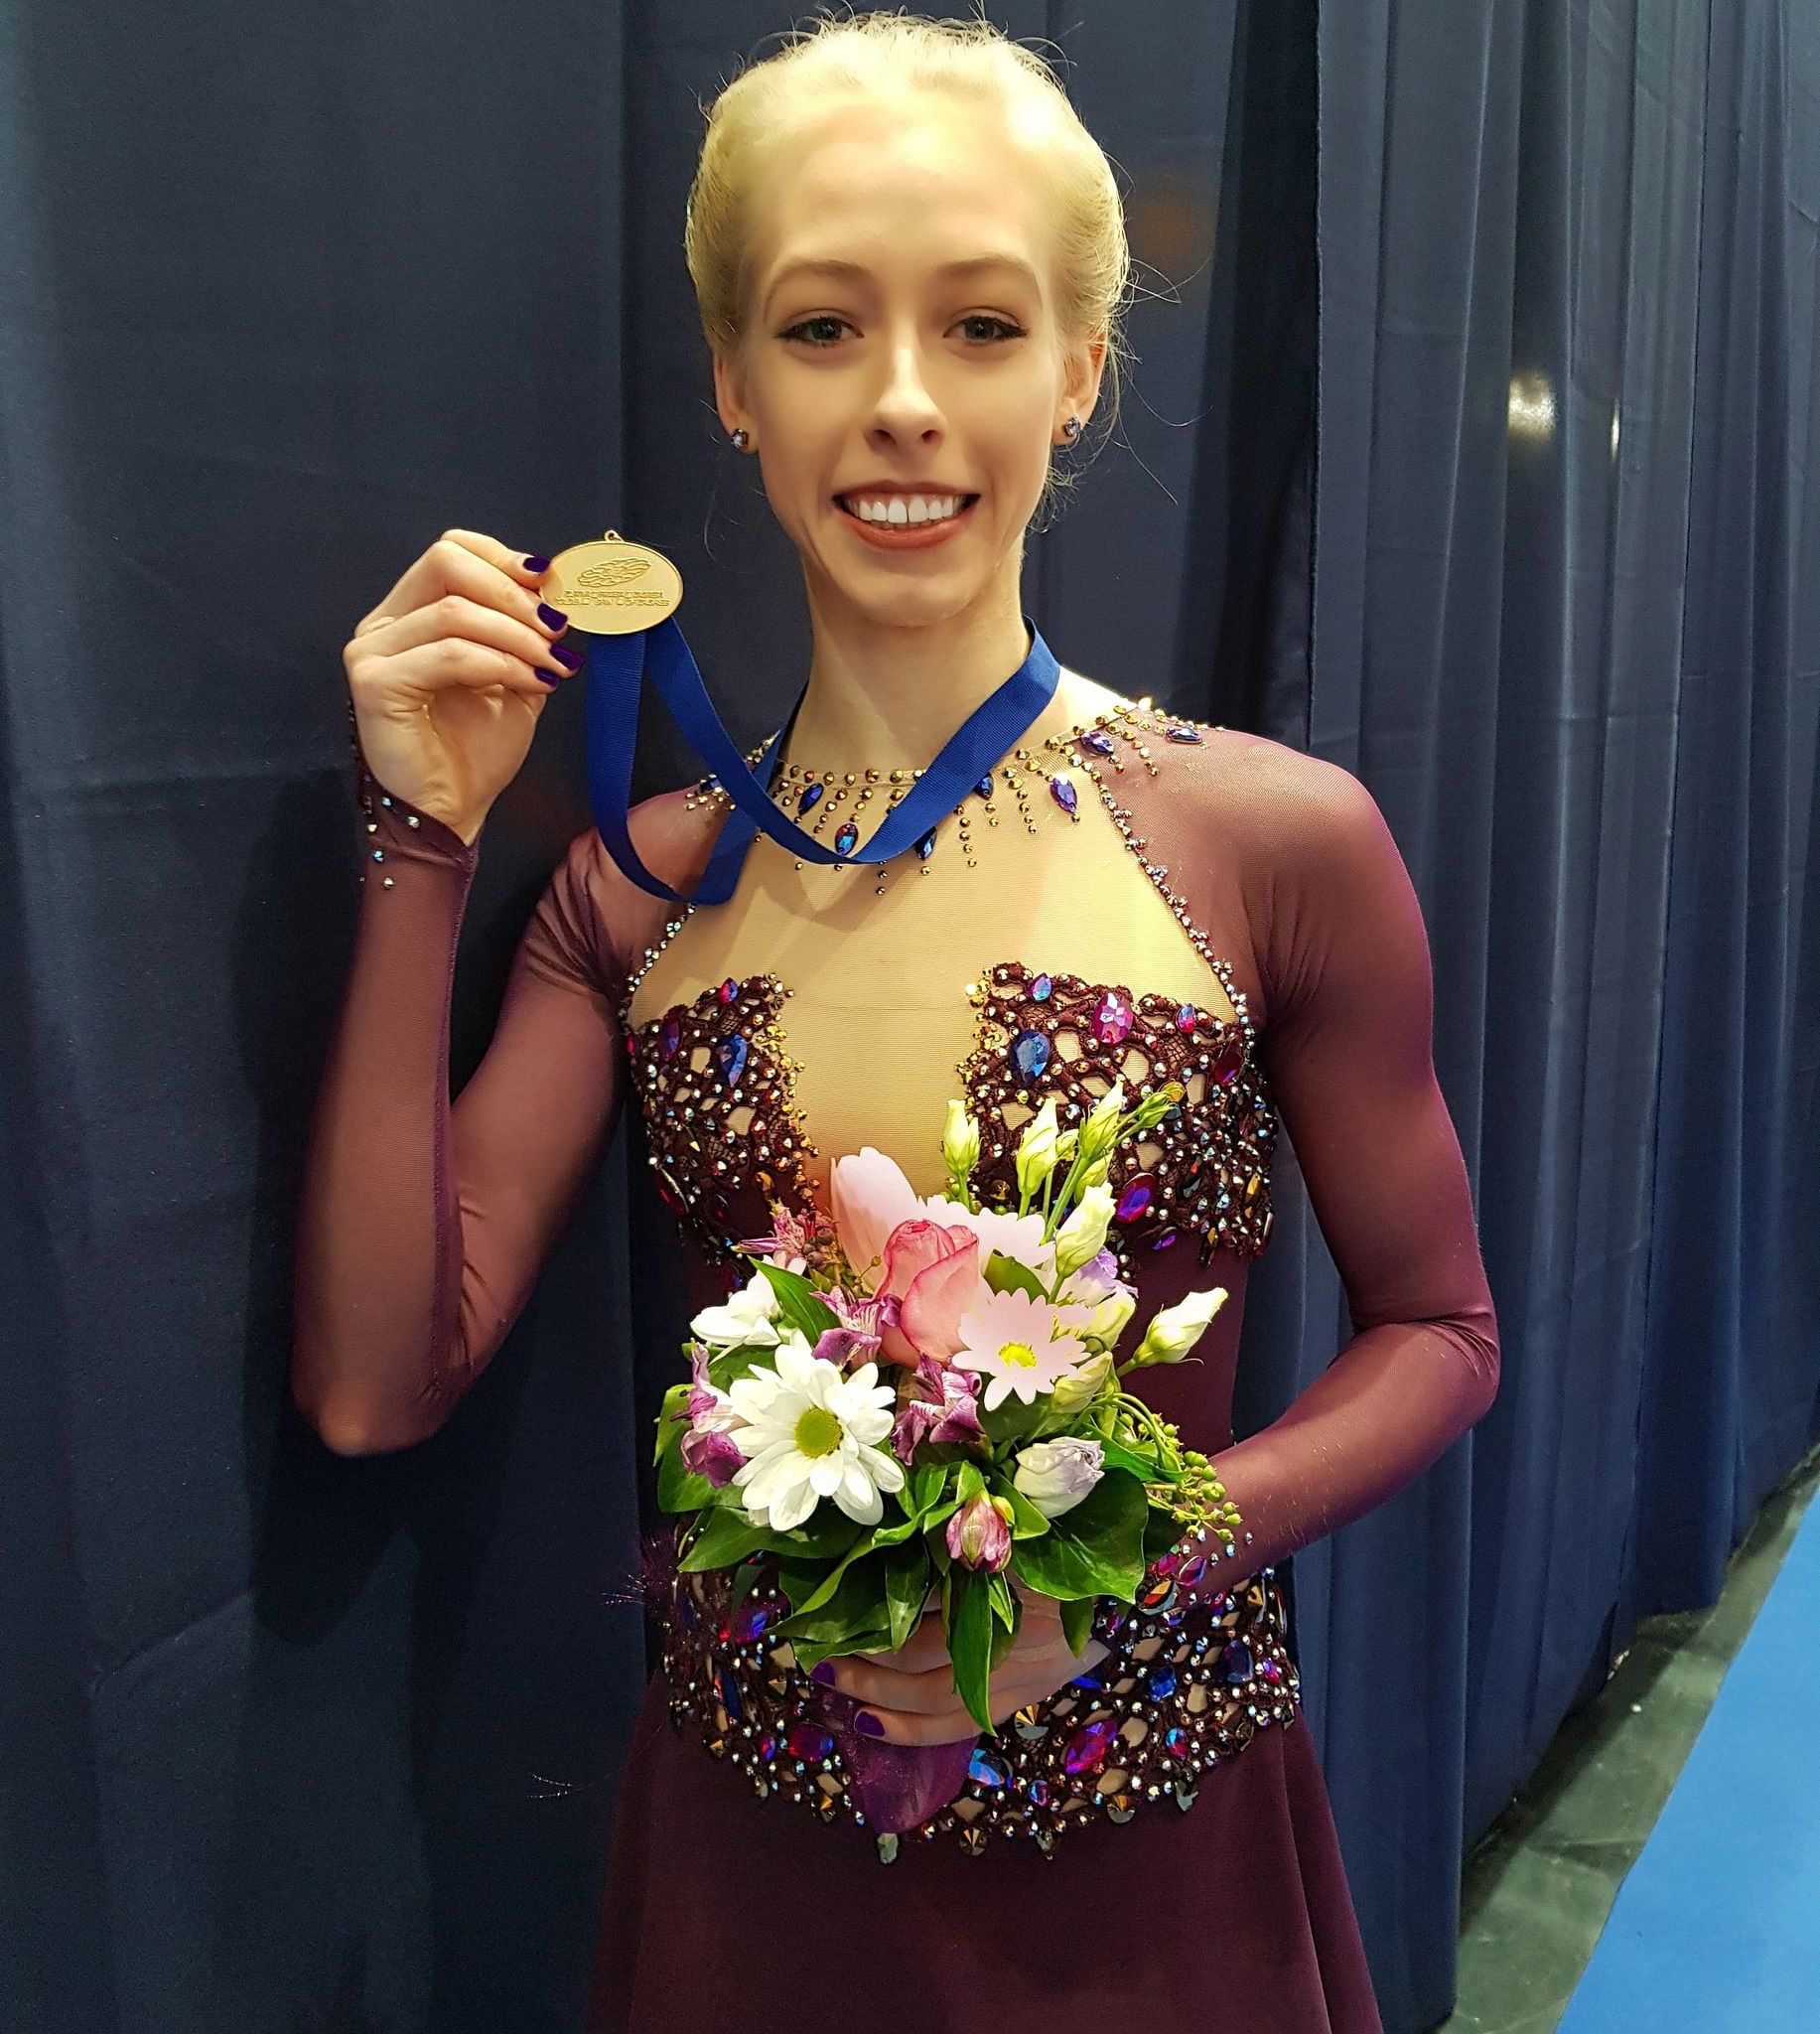 Bradie Tennell, a 2018 Olympic bronze medalist and U.S. figure skating champion. Credit: Twitter Image/@bradie_tennell